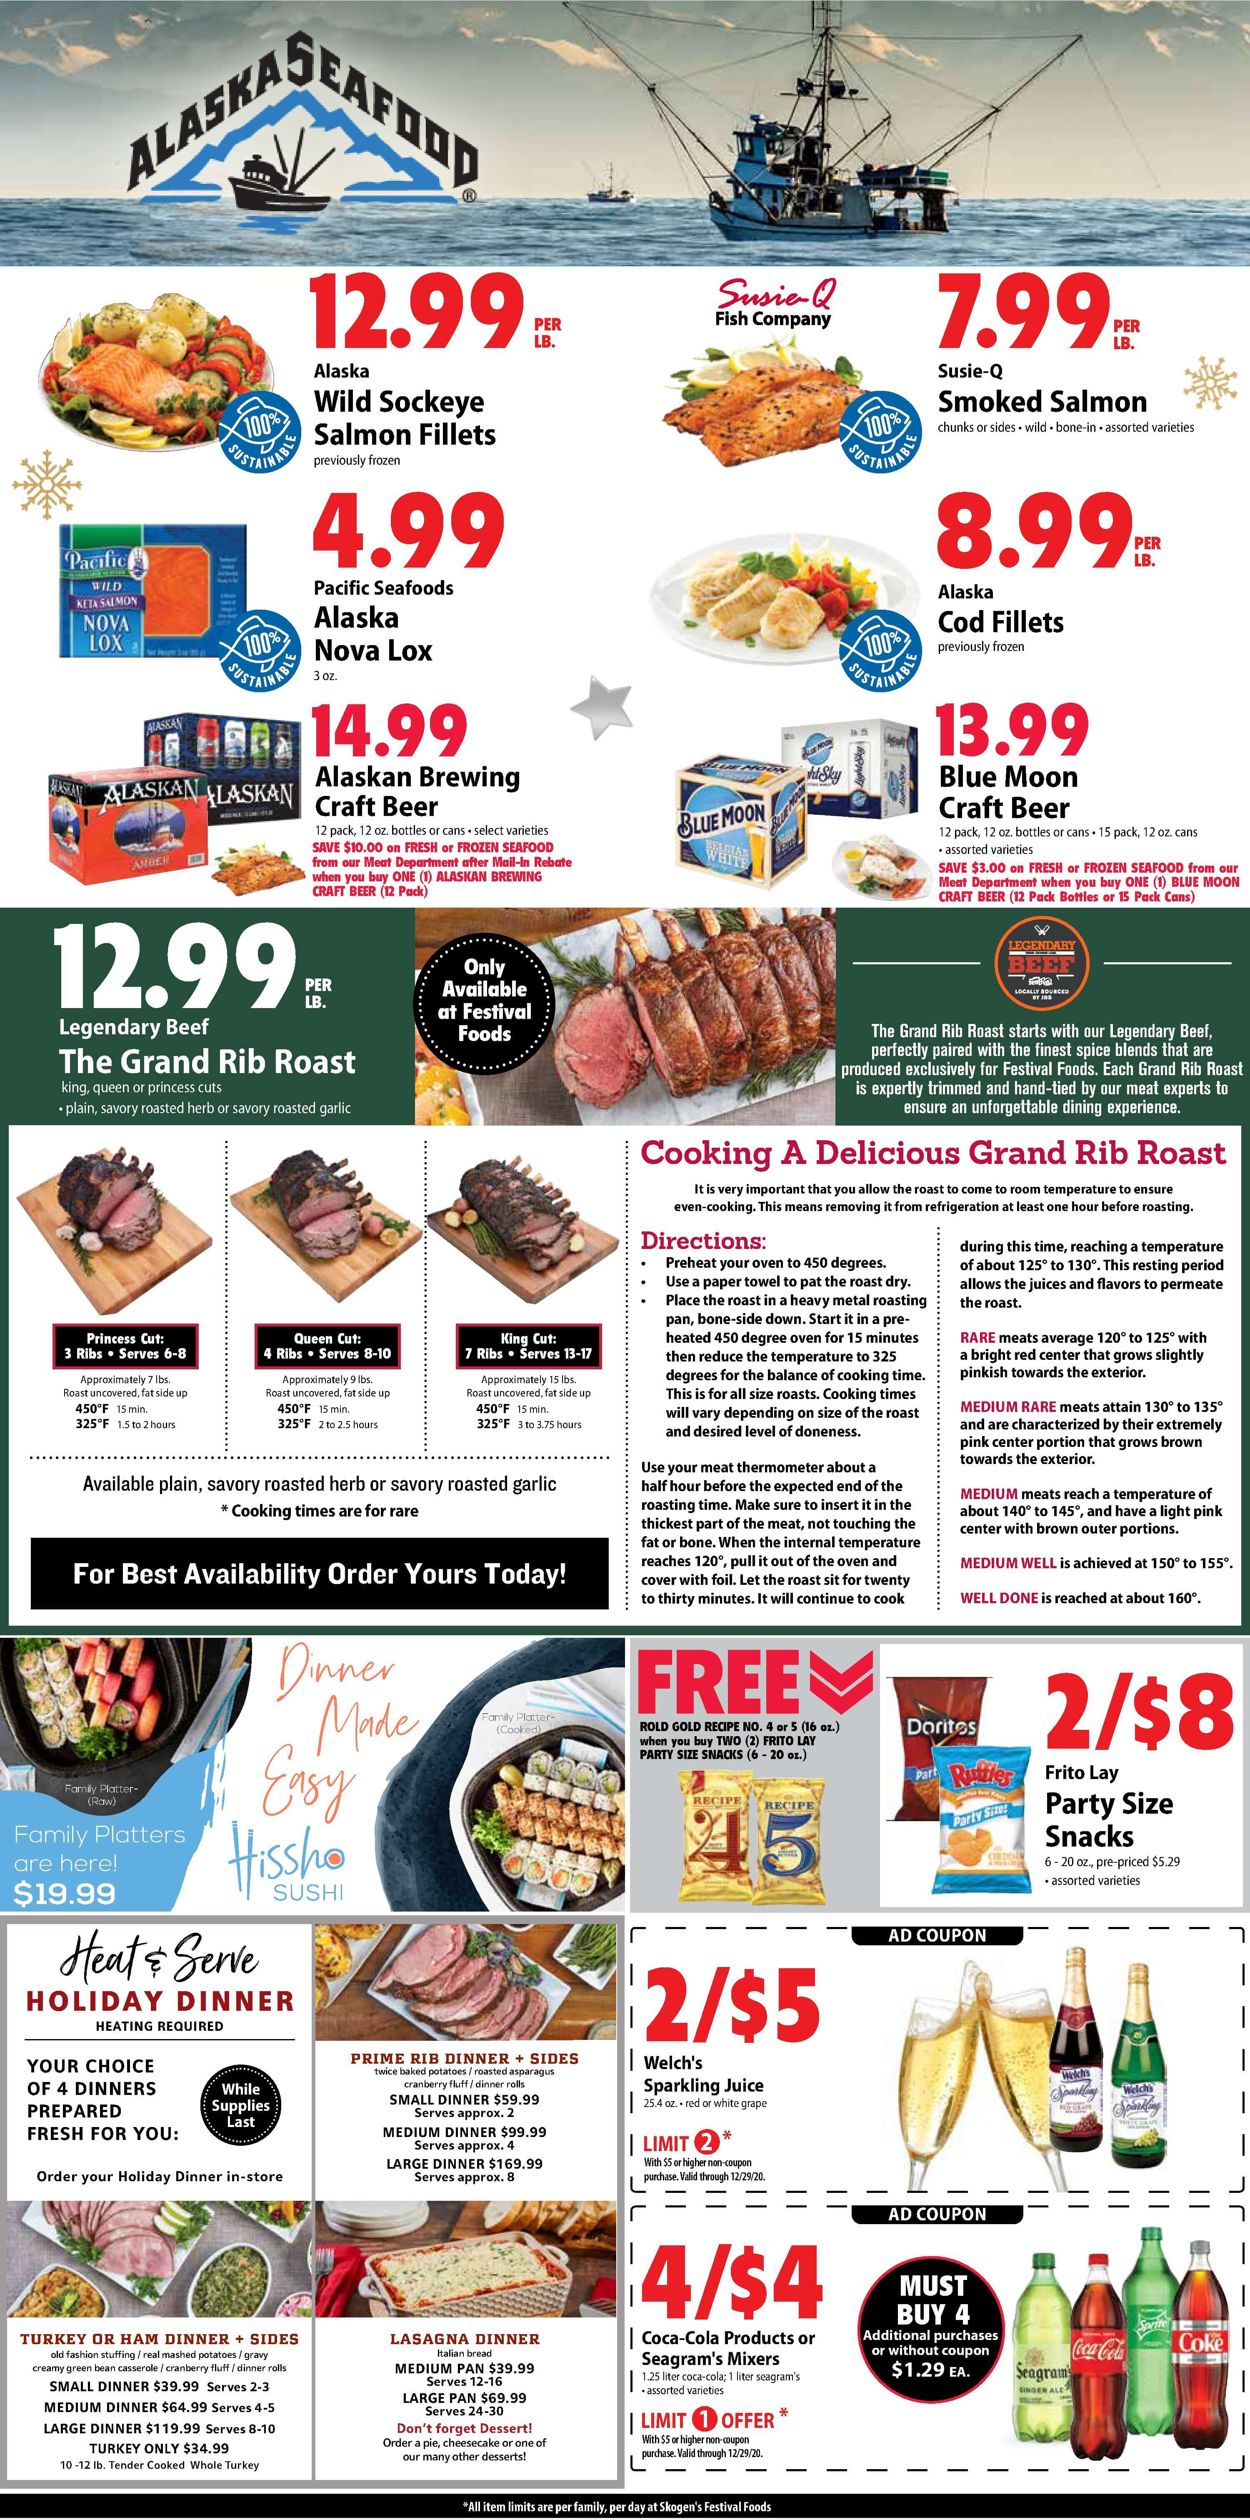 Festival Foods Christmas 2020 Weekly Ad Circular - valid 12/23-12/29/2020 (Page 4)